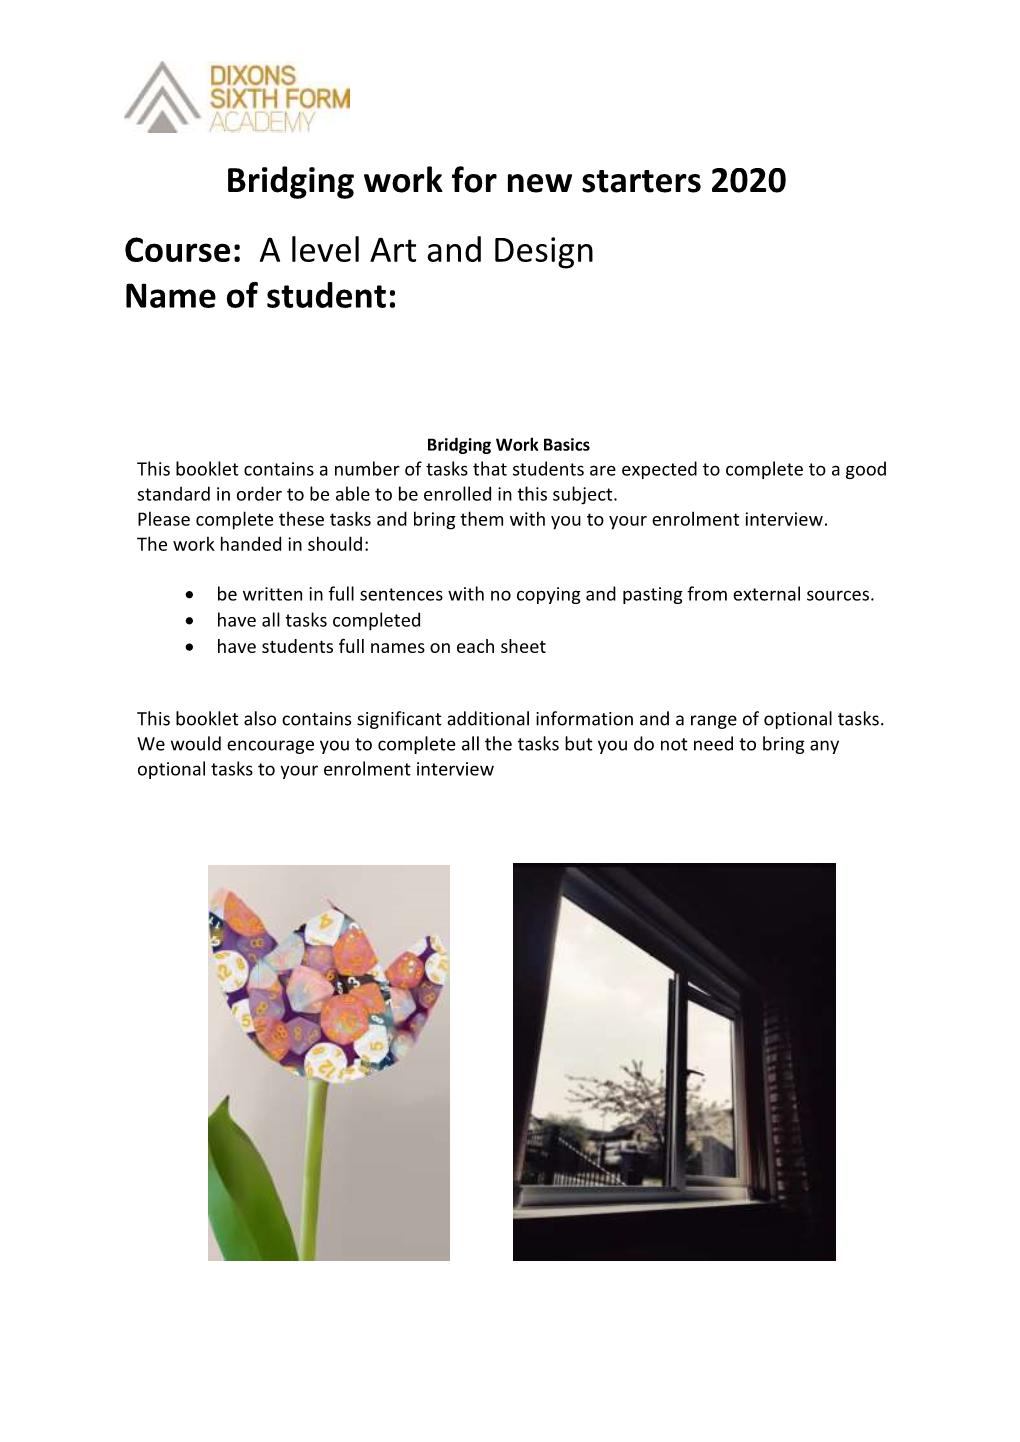 Bridging Work for New Starters 2020 Course: a Level Art and Design